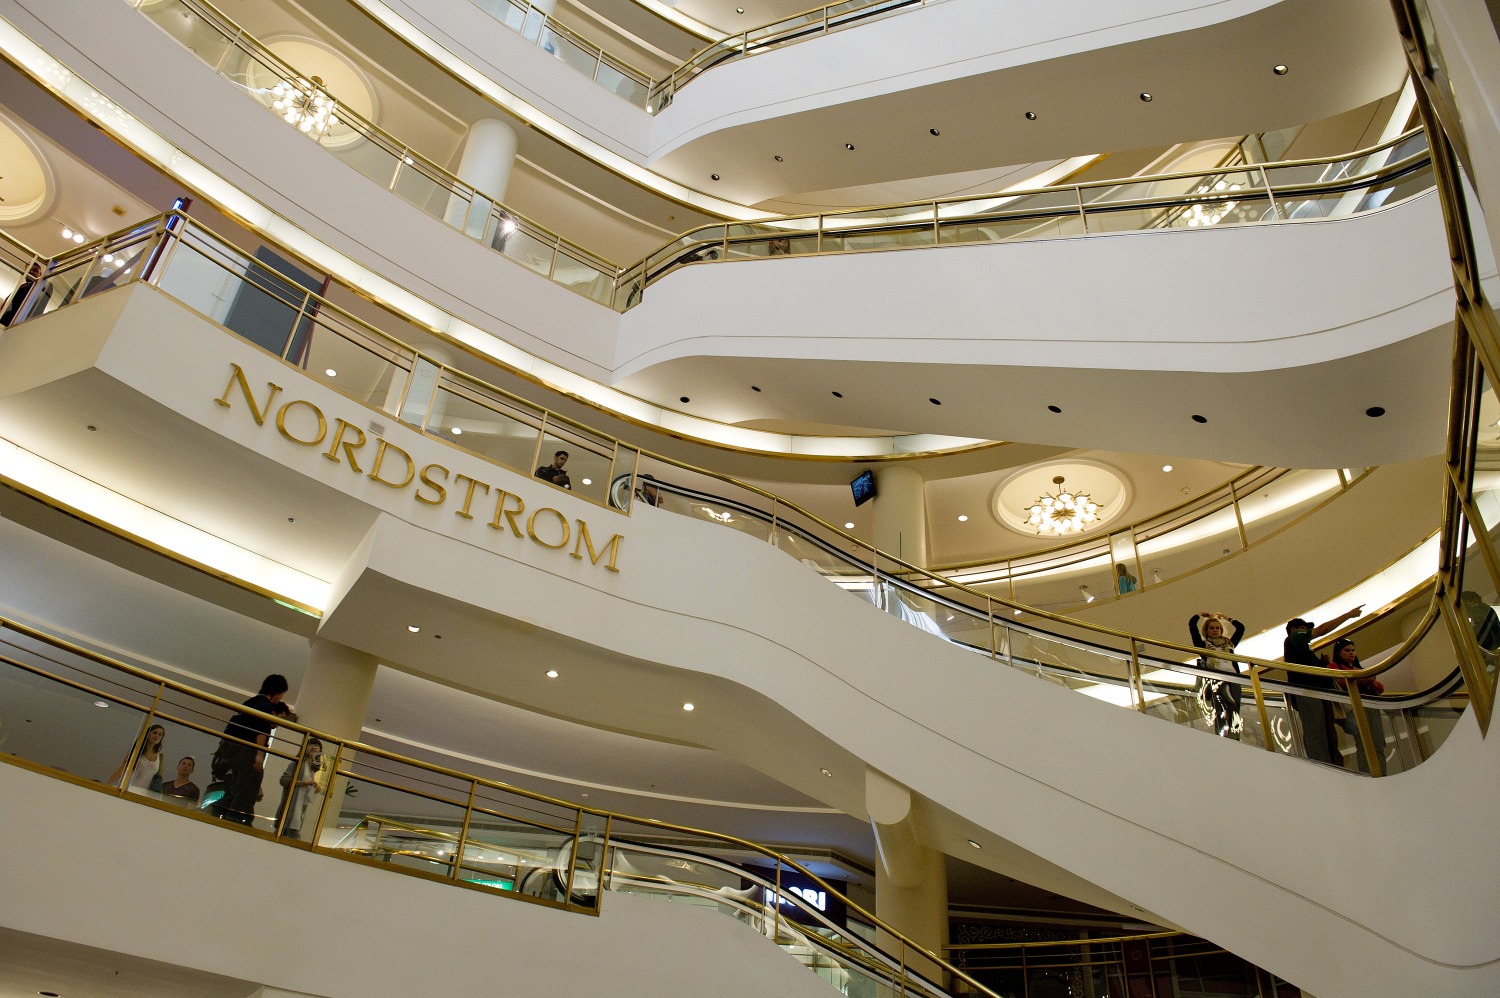 Nordstrom Is Permanently Closing 16 Stores + What Else It's Doing To Cut  More Costs